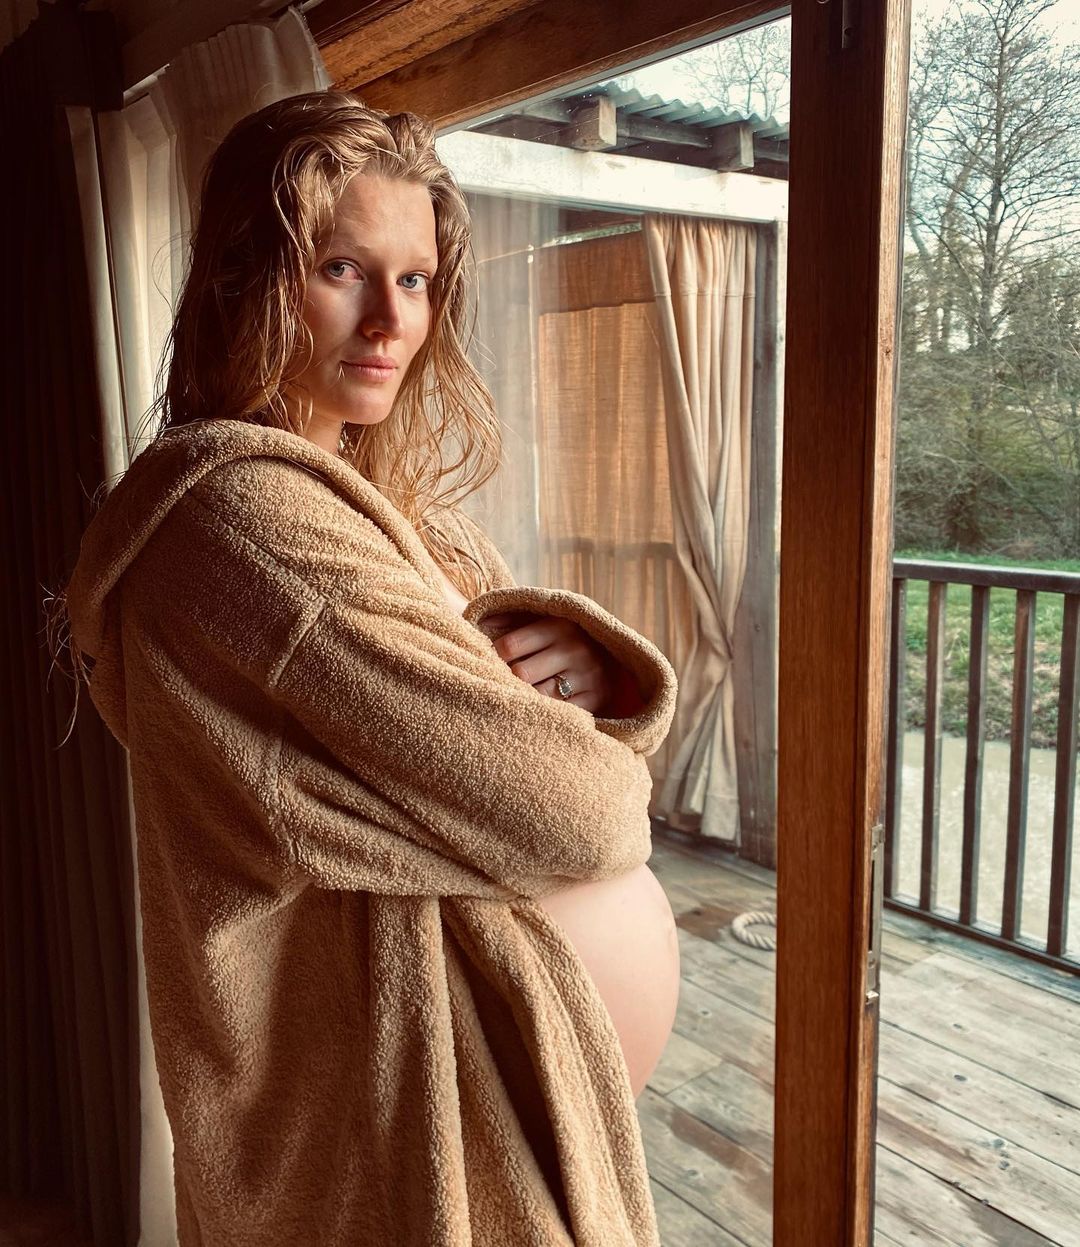 Celebrities Posing Nude While Pregnant Maternity Pics image photo